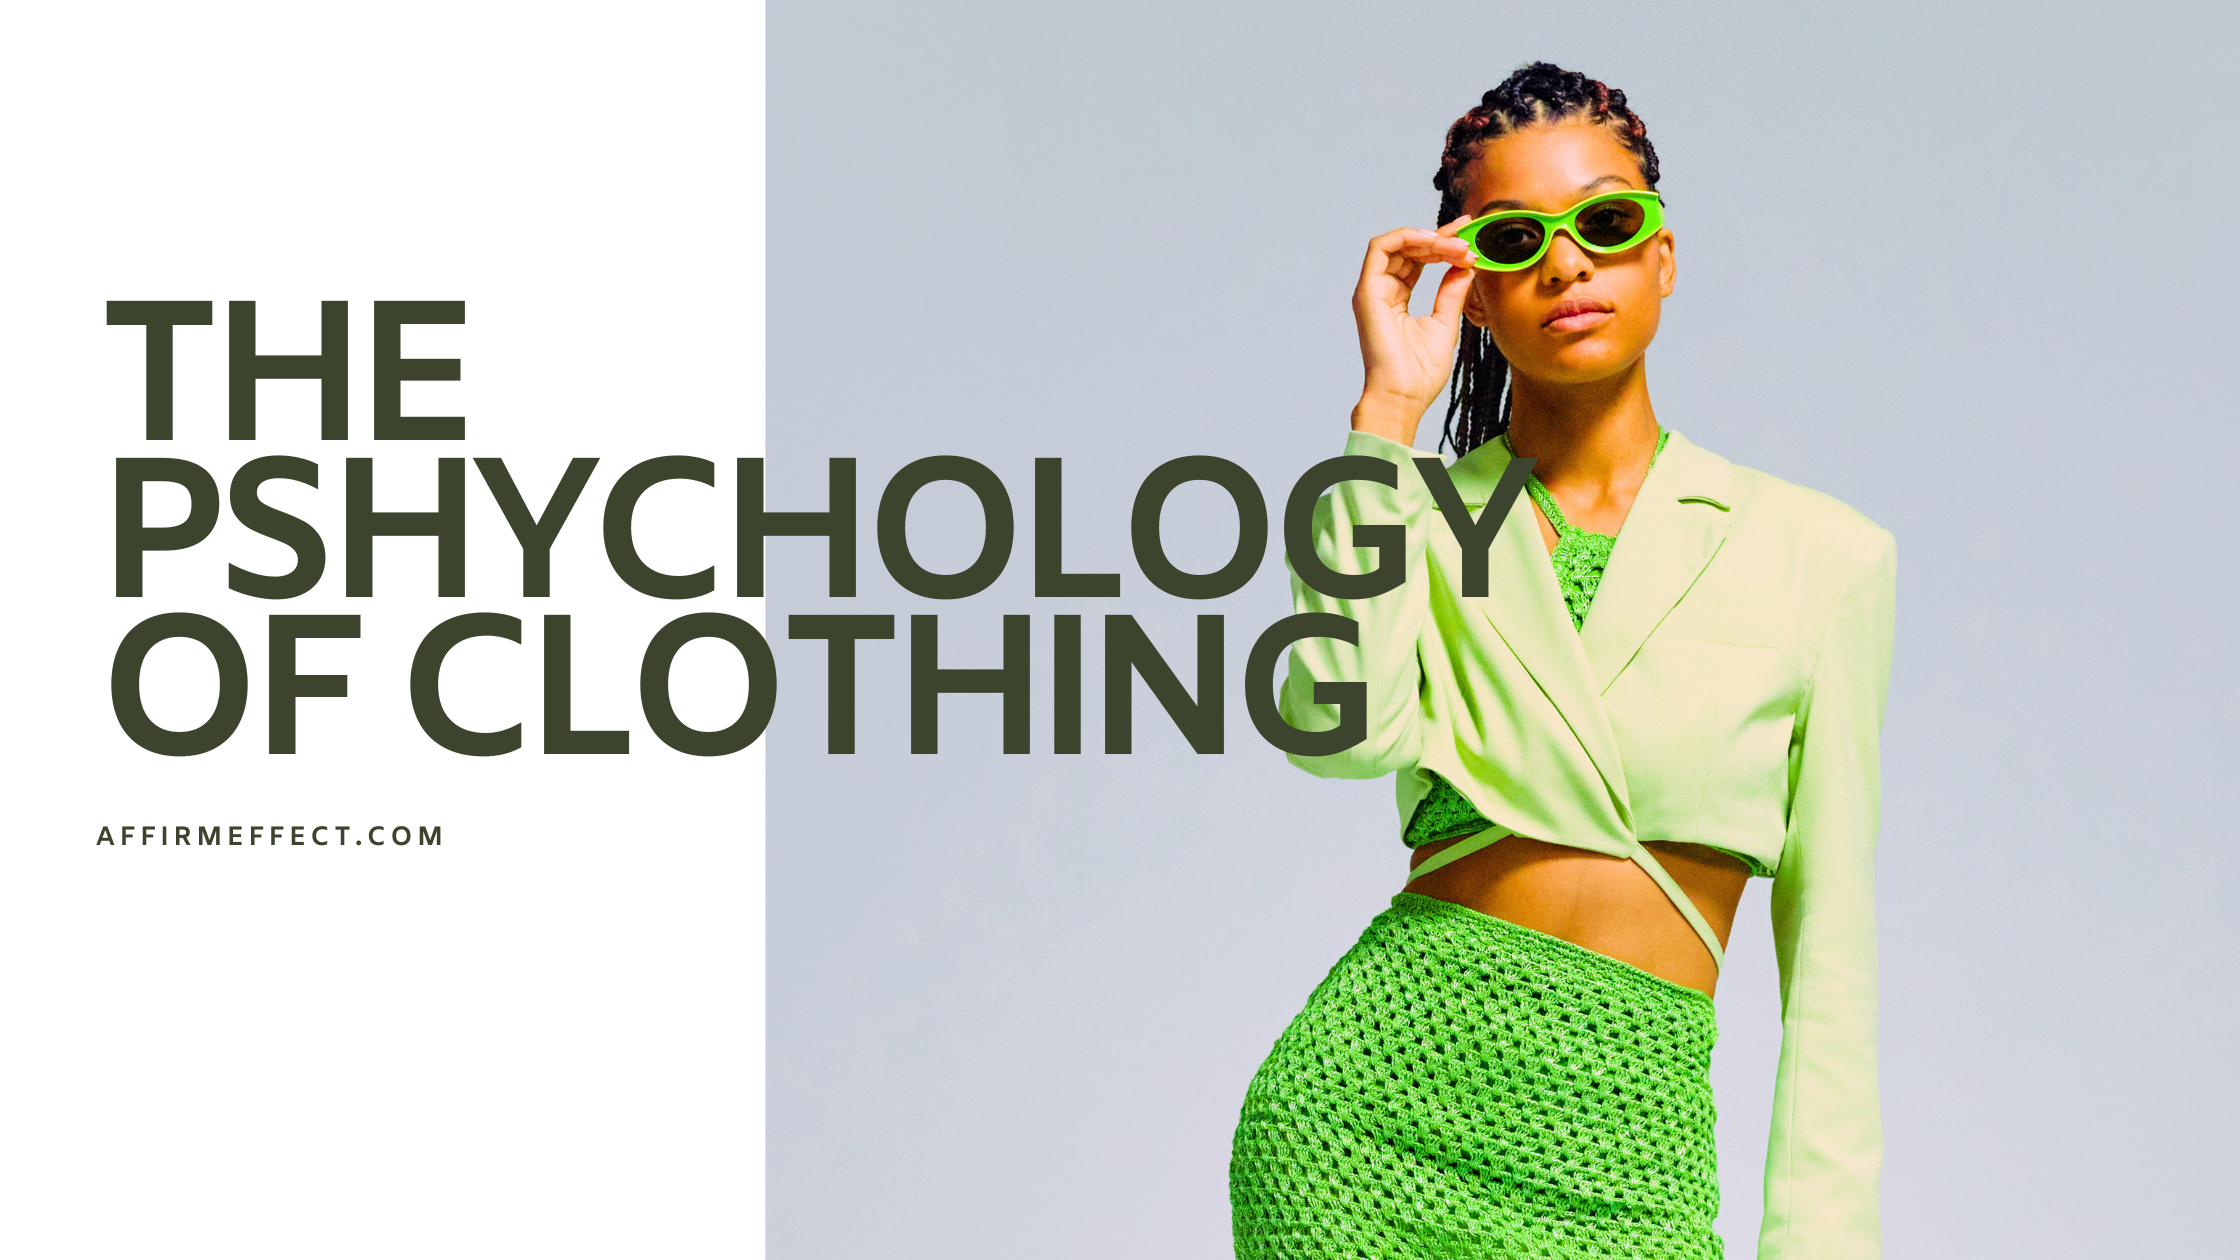 Why What You Wear Matters: The Psychology of Clothing